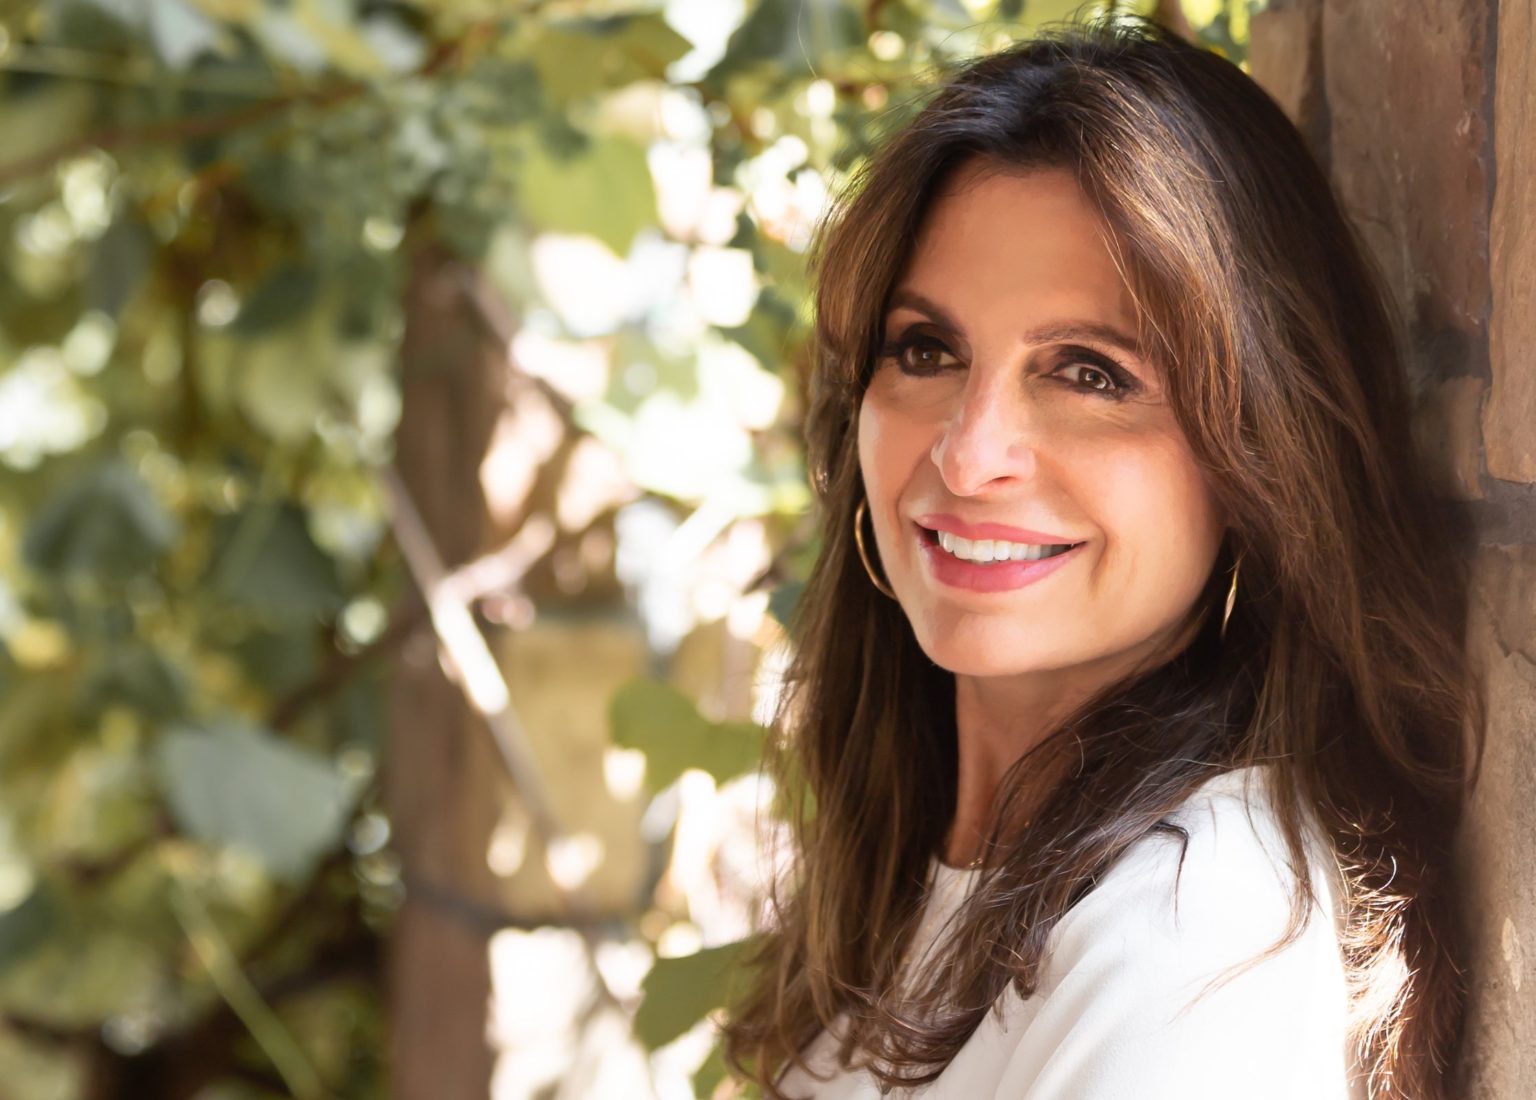 Lisa Bevere on Why the Church Must Stop Undermining the Strength of